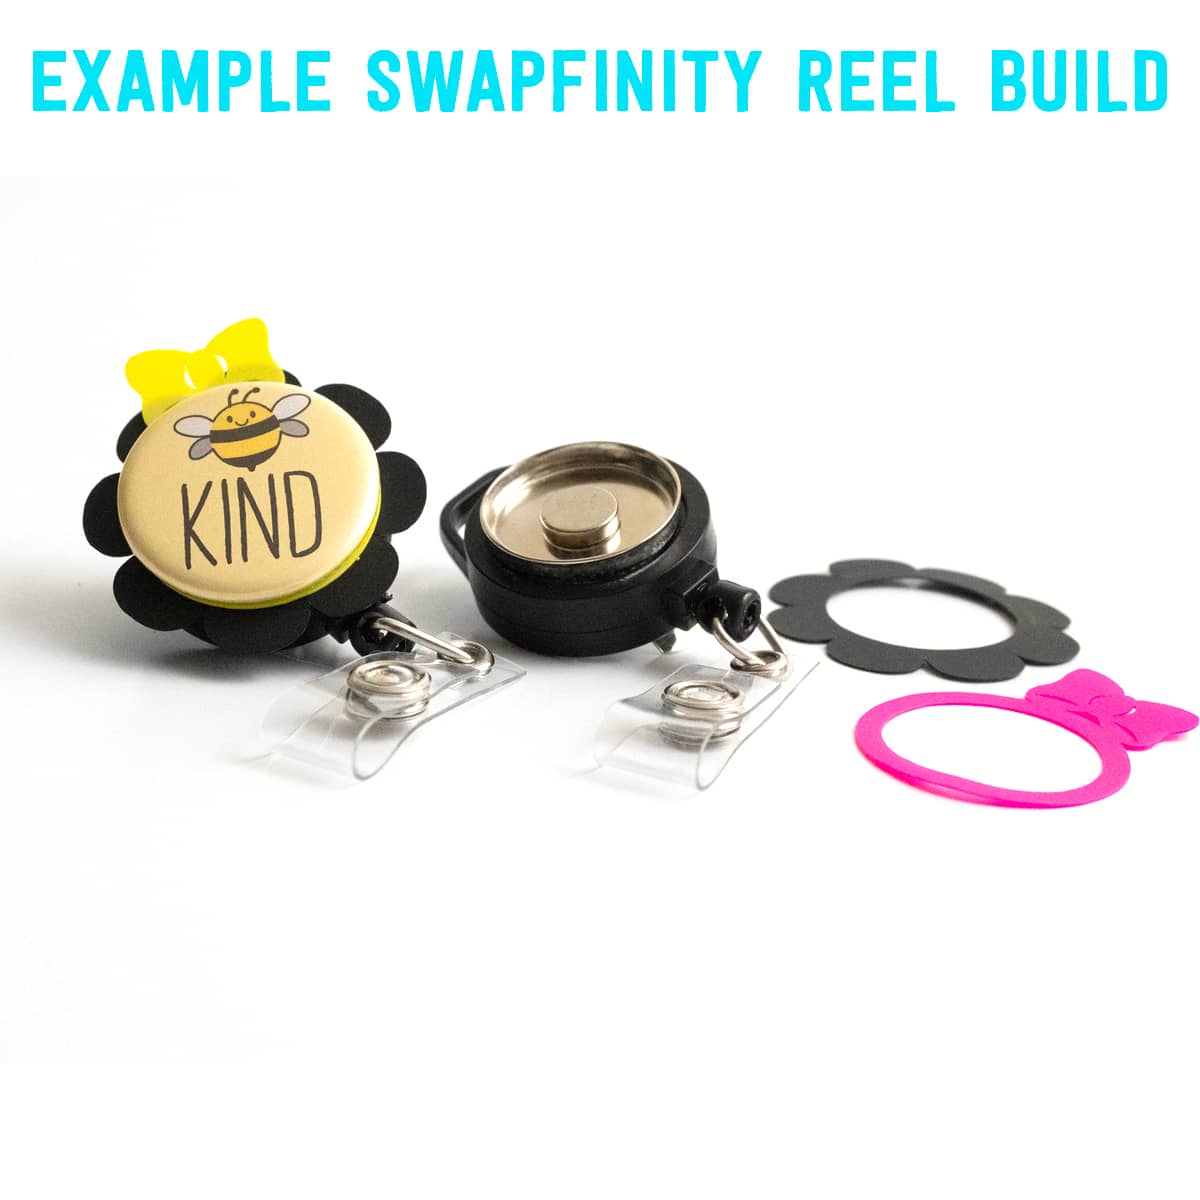 Funny ID Badge Reels Tagged Funny - Topperswap